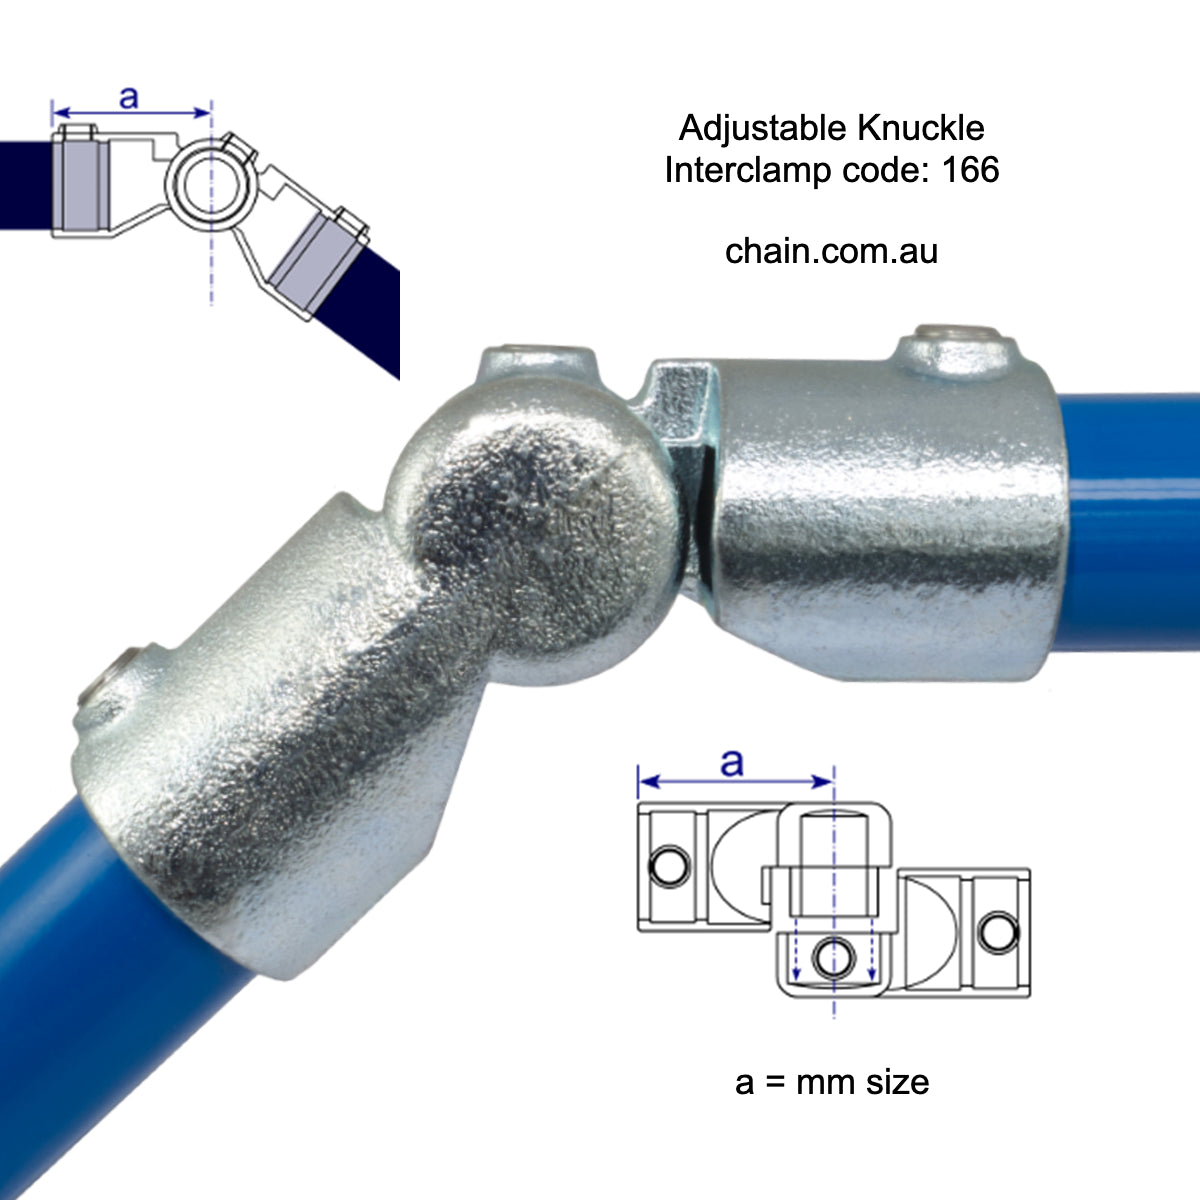 Adjustable Knuckle by Interclamp, Code 166. Shop rail, pipe and fence fittings online chain.com.au. Australia wide shipping.